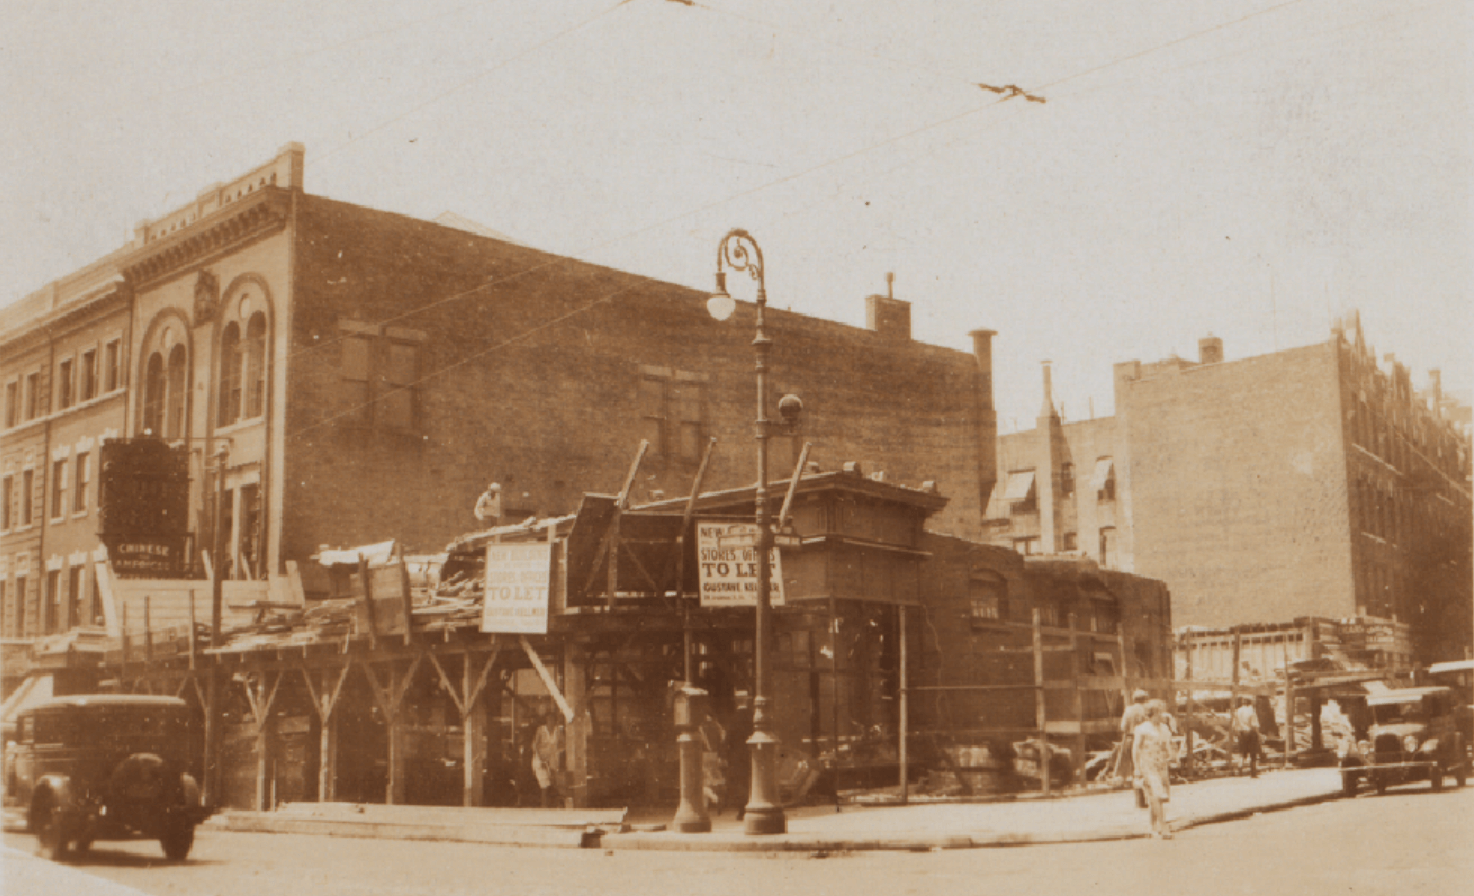 Here is the corner of Flatbush Avenue and Caton Avenue in 1929. The old post office building is just out of view on the far left. 